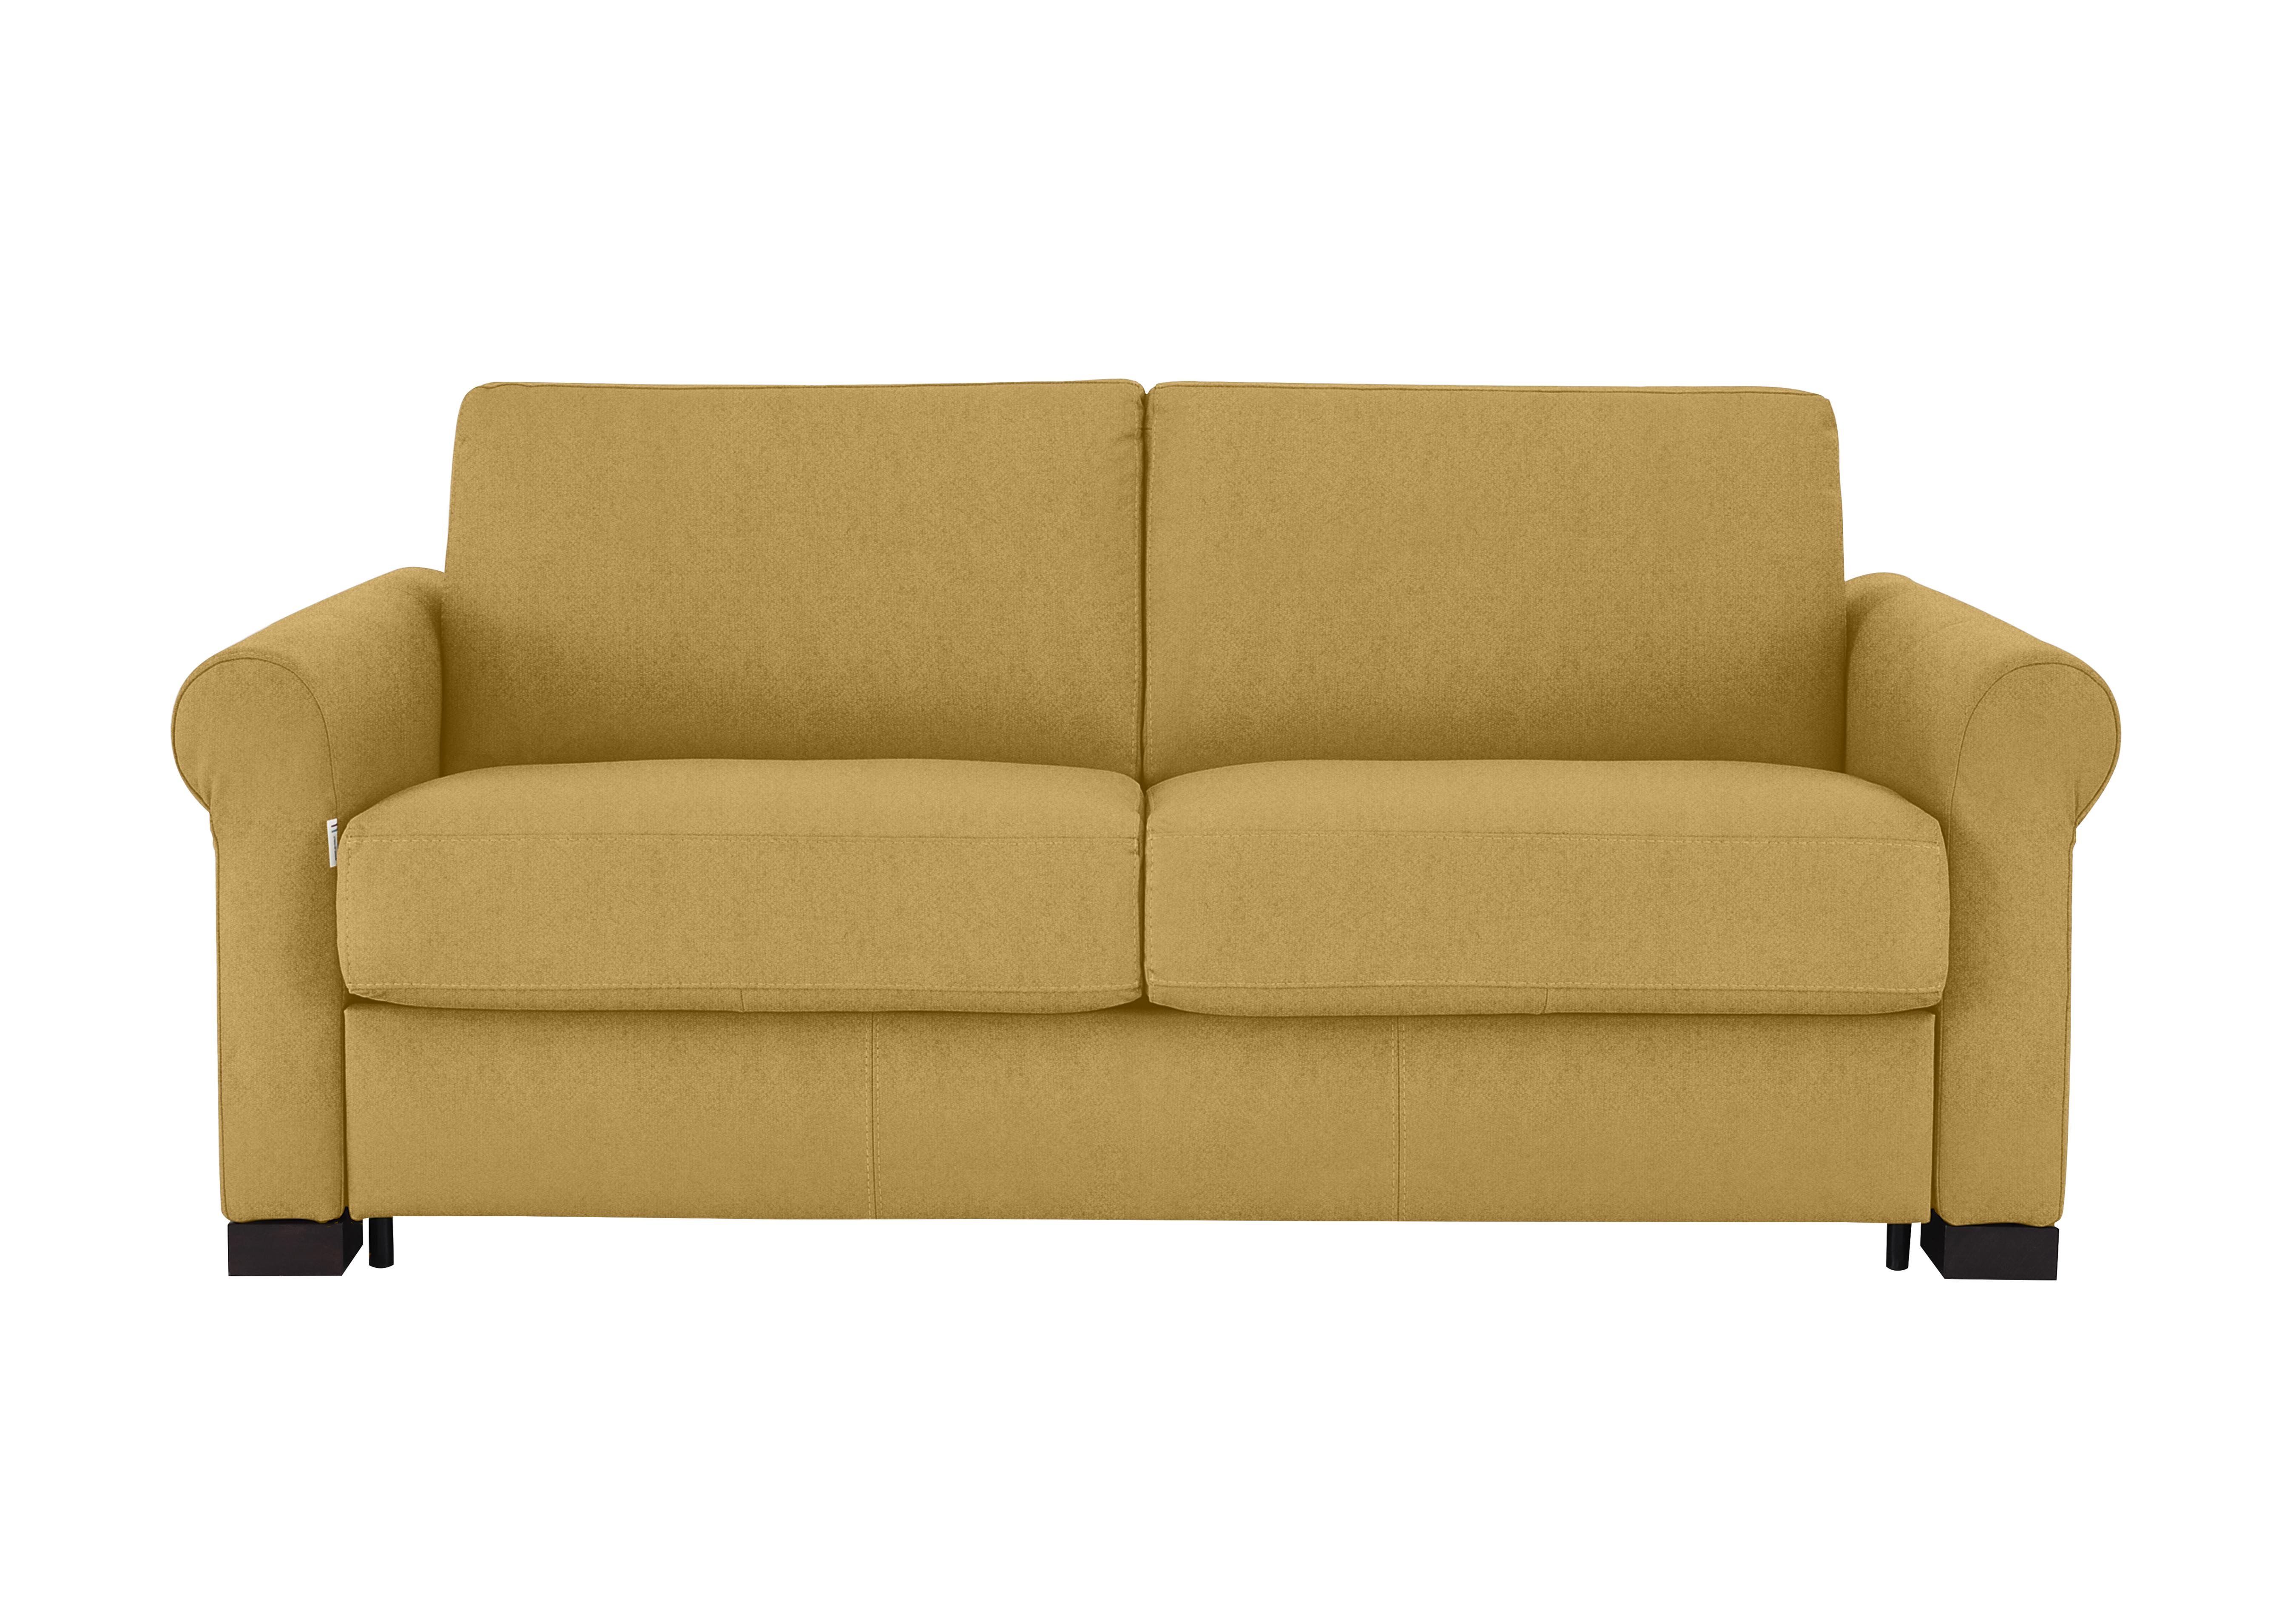 Alcova 2.5 Seater Fabric Sofa Bed with Scroll Arms in Fuente Mostaza on Furniture Village